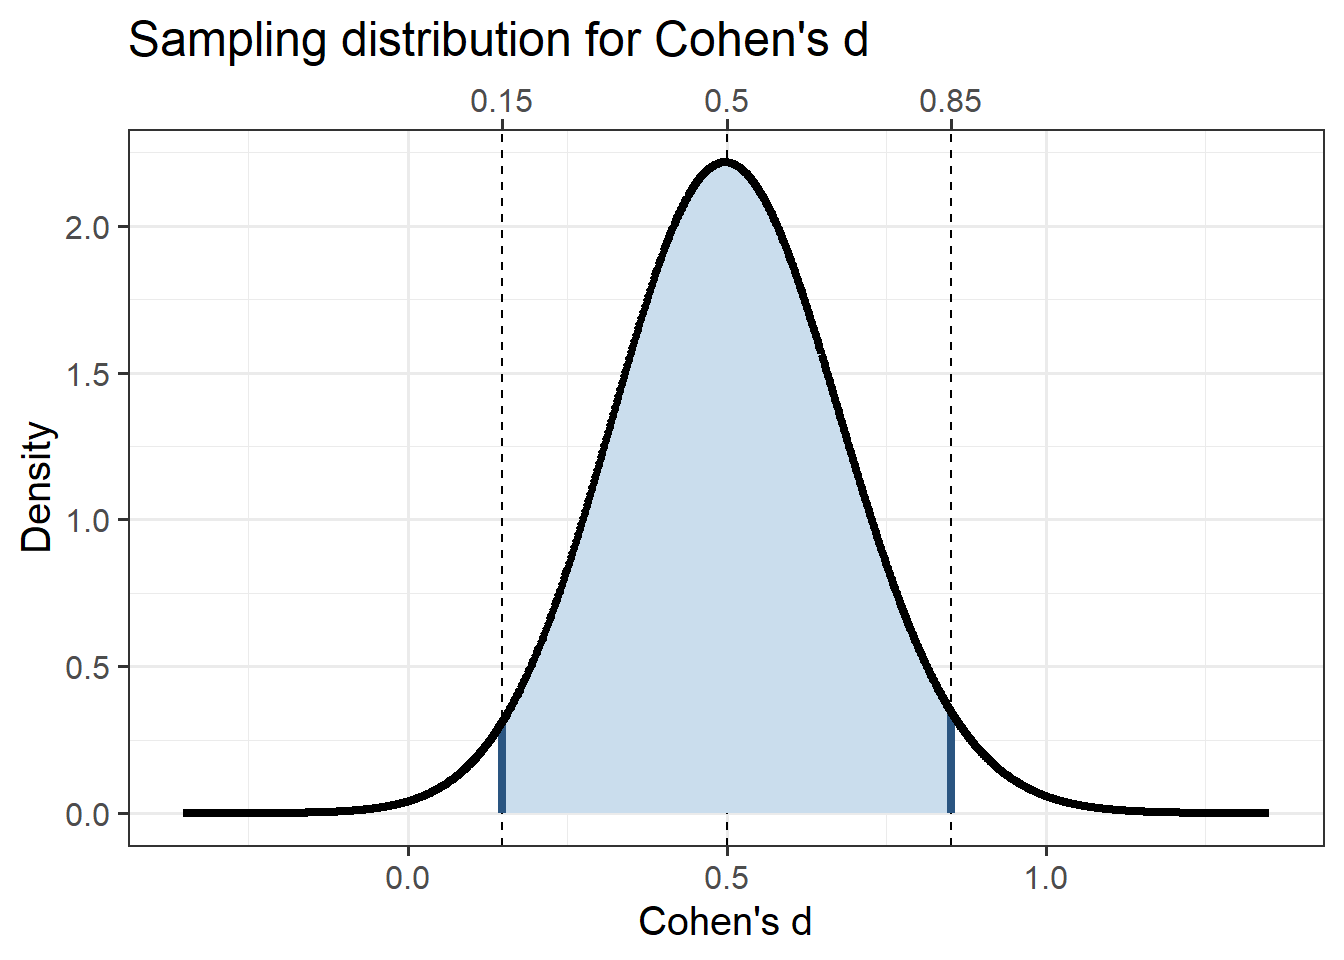 Cohen's d's sampling distribution for a moderate population effect size (d = 0.5) and for a 2-cell design with 80\% power (i.e. 64 participants per group).